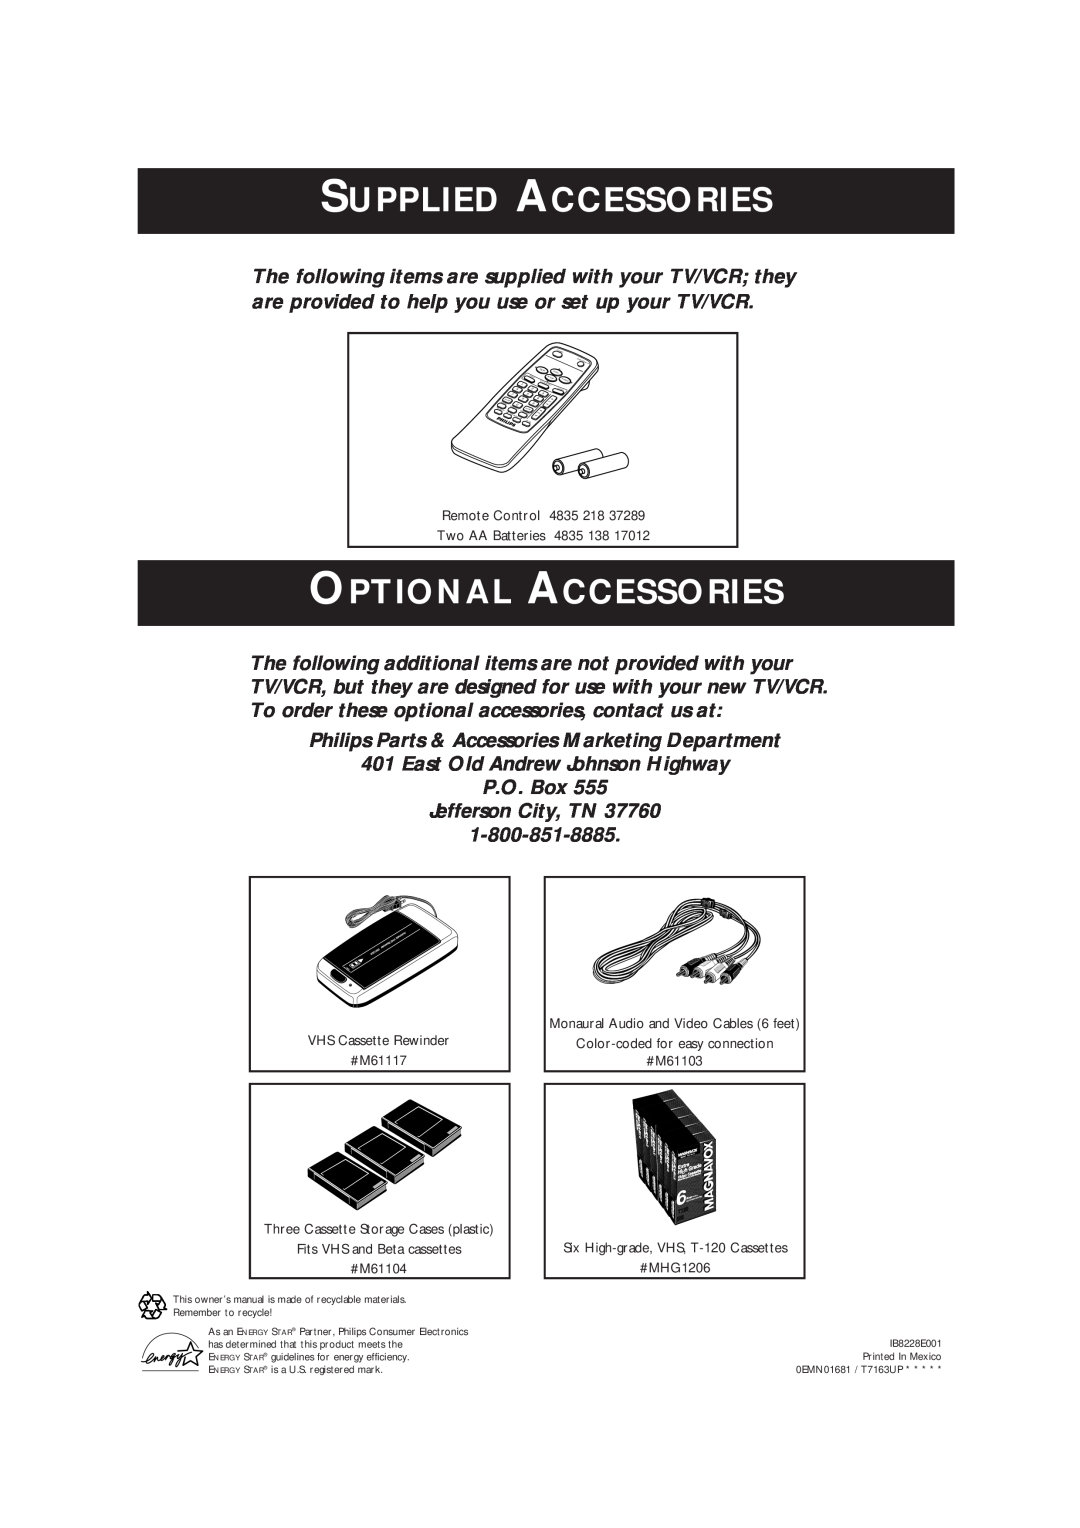 Magnavox CCB193AT owner manual Philips Parts & Accessories Marketing Department, Supplied Accessories, Optional Accessories 